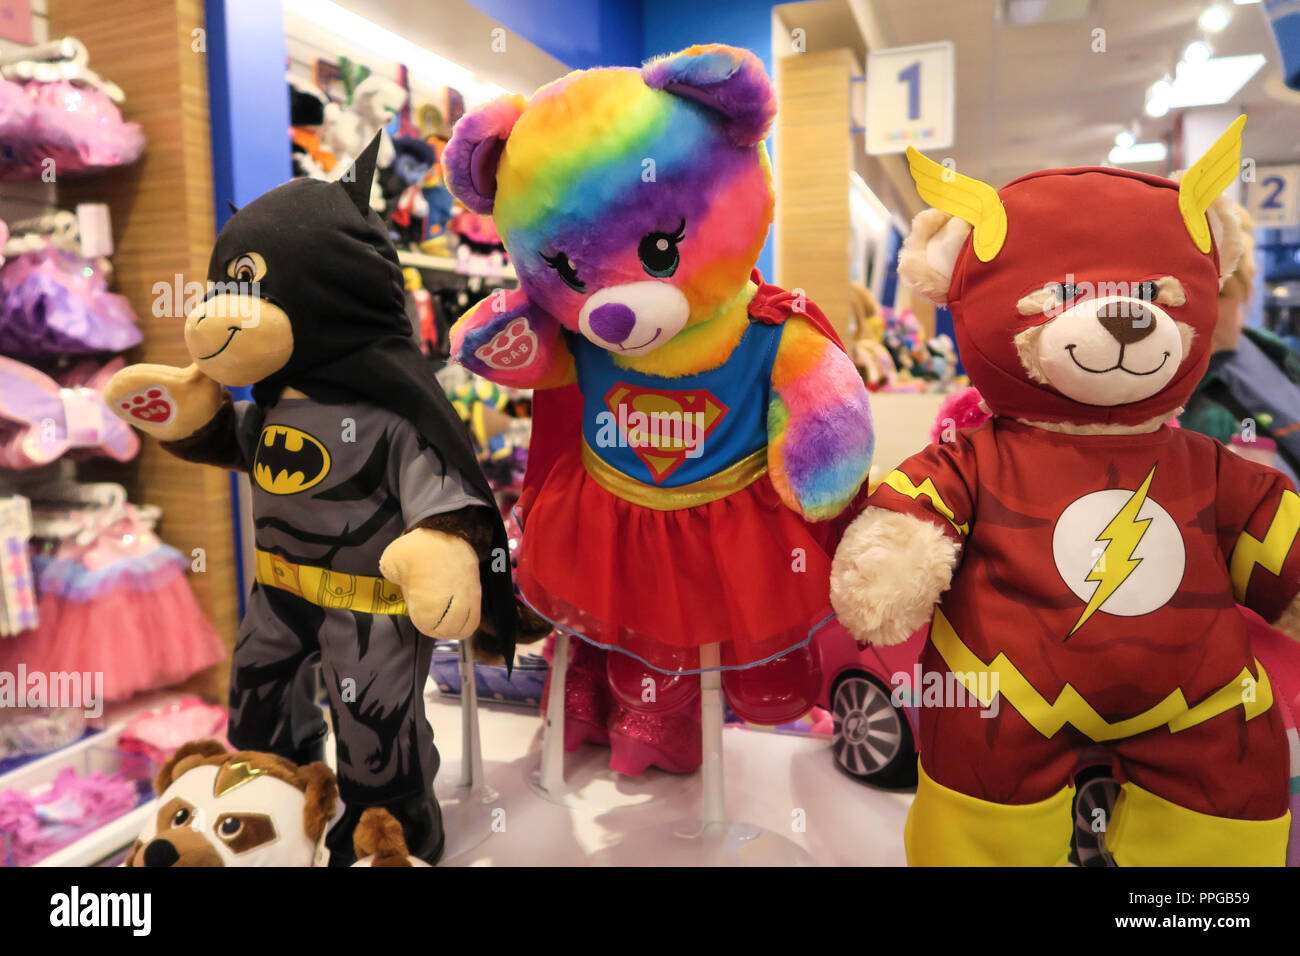 Build-A-Bear Celebrates its 20th Birthday With A New NYC Store & New Online  Services